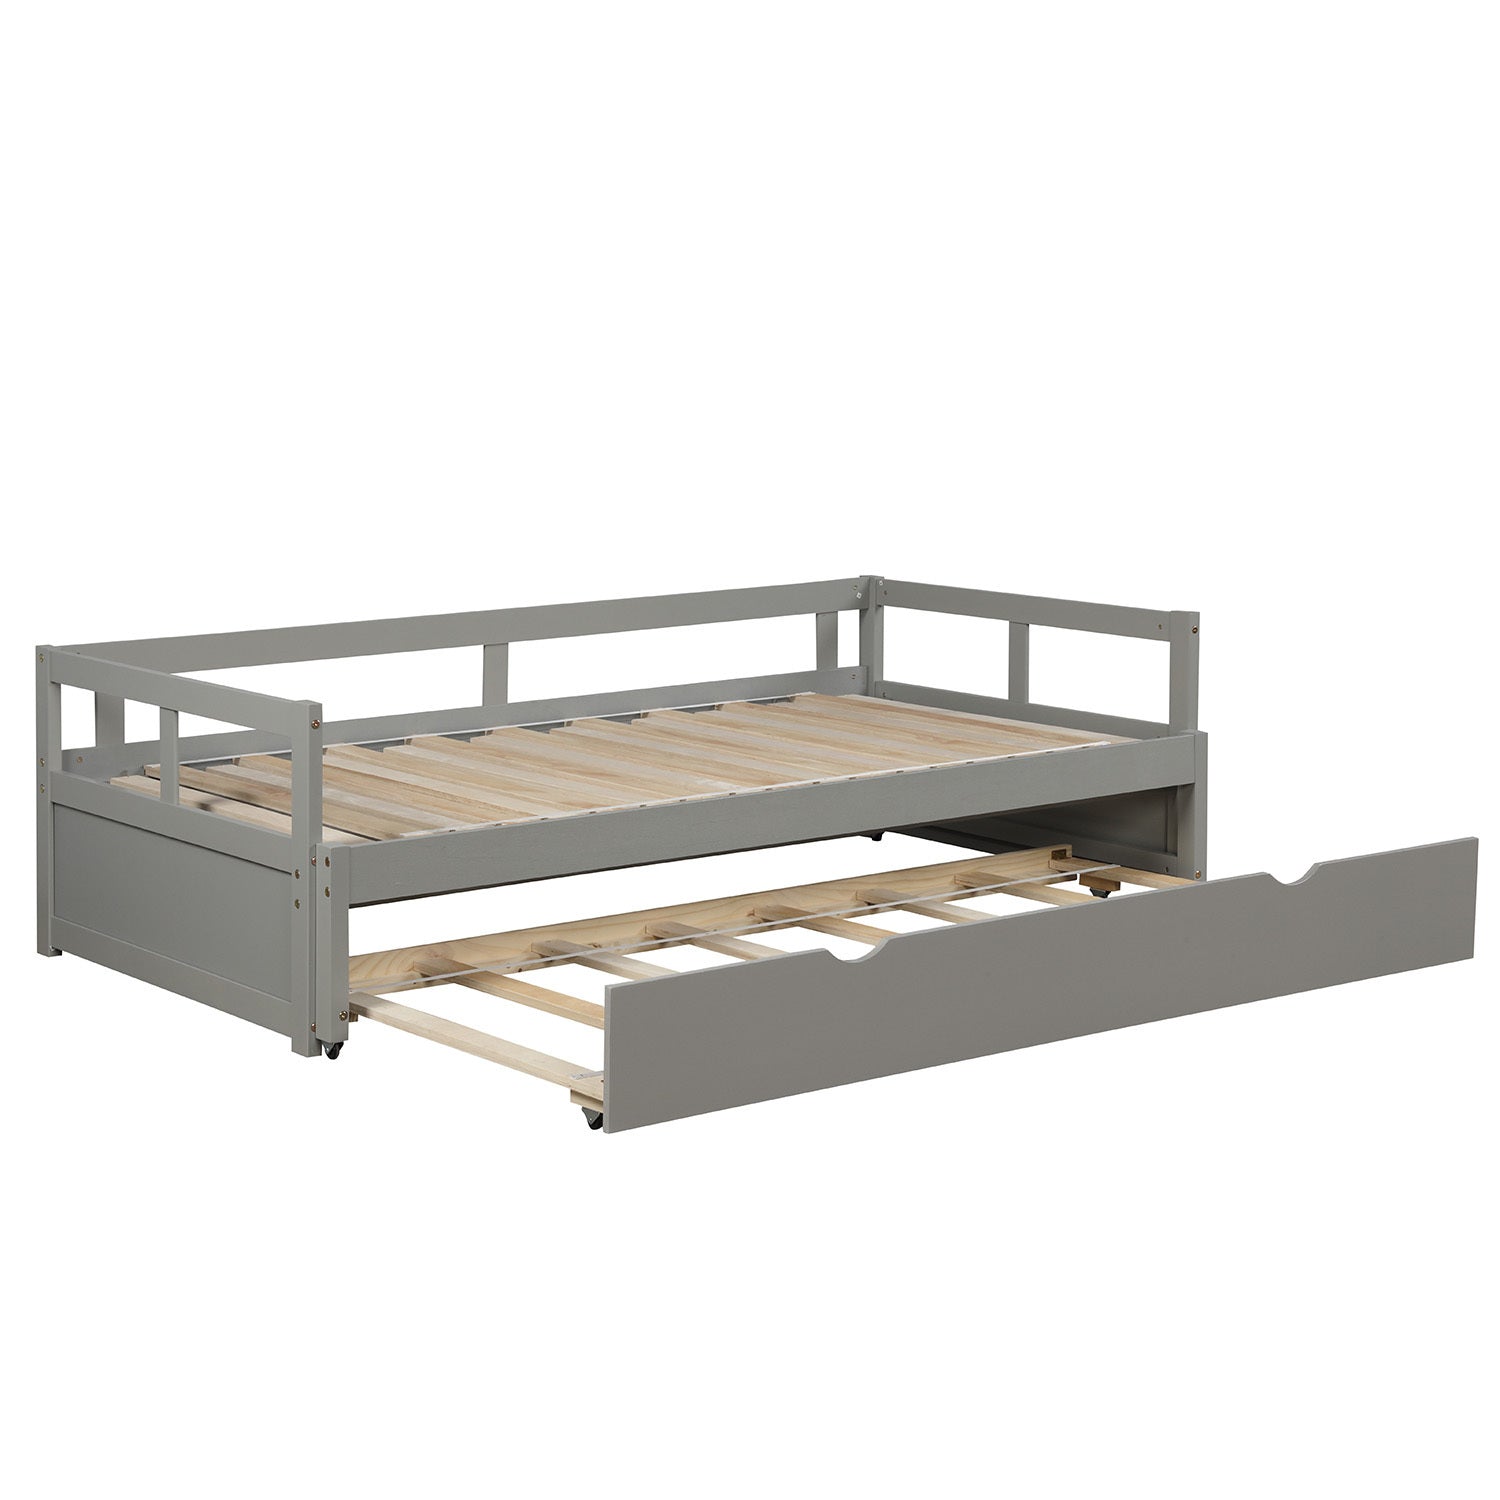 Extending Daybed with Trundle (Gray)